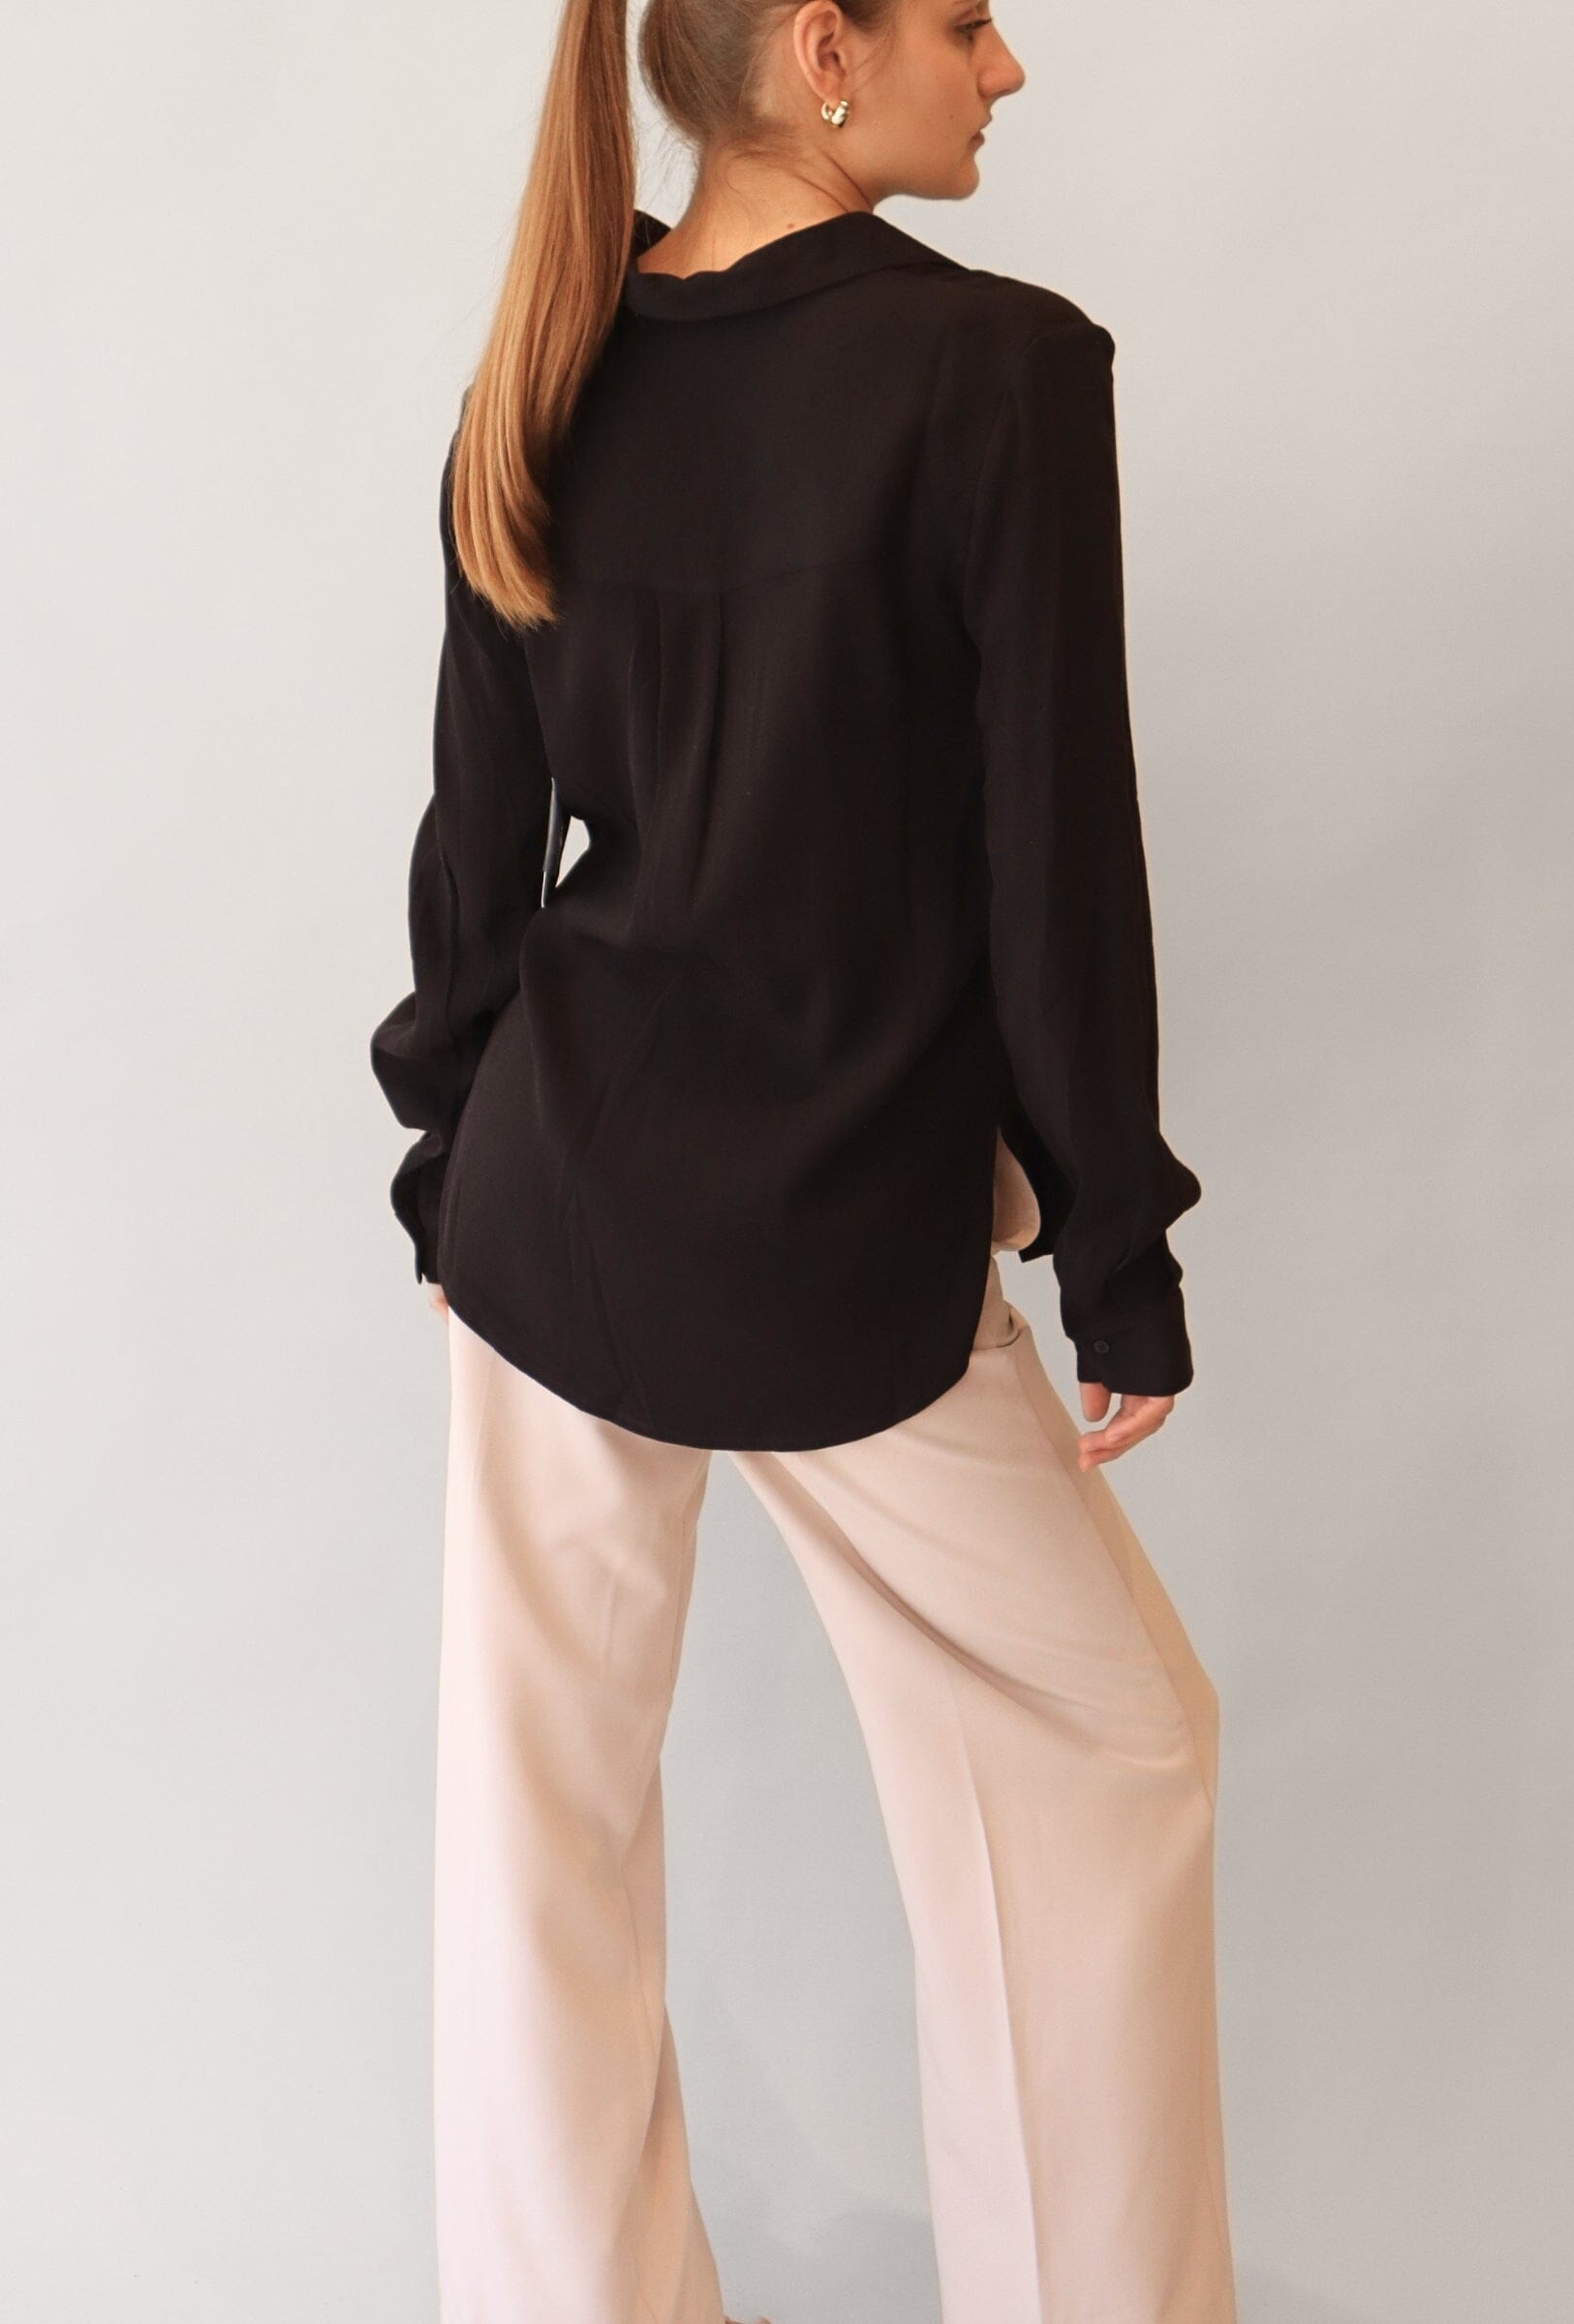 BLACK CREPE BLOUSE Top RD STYLE 